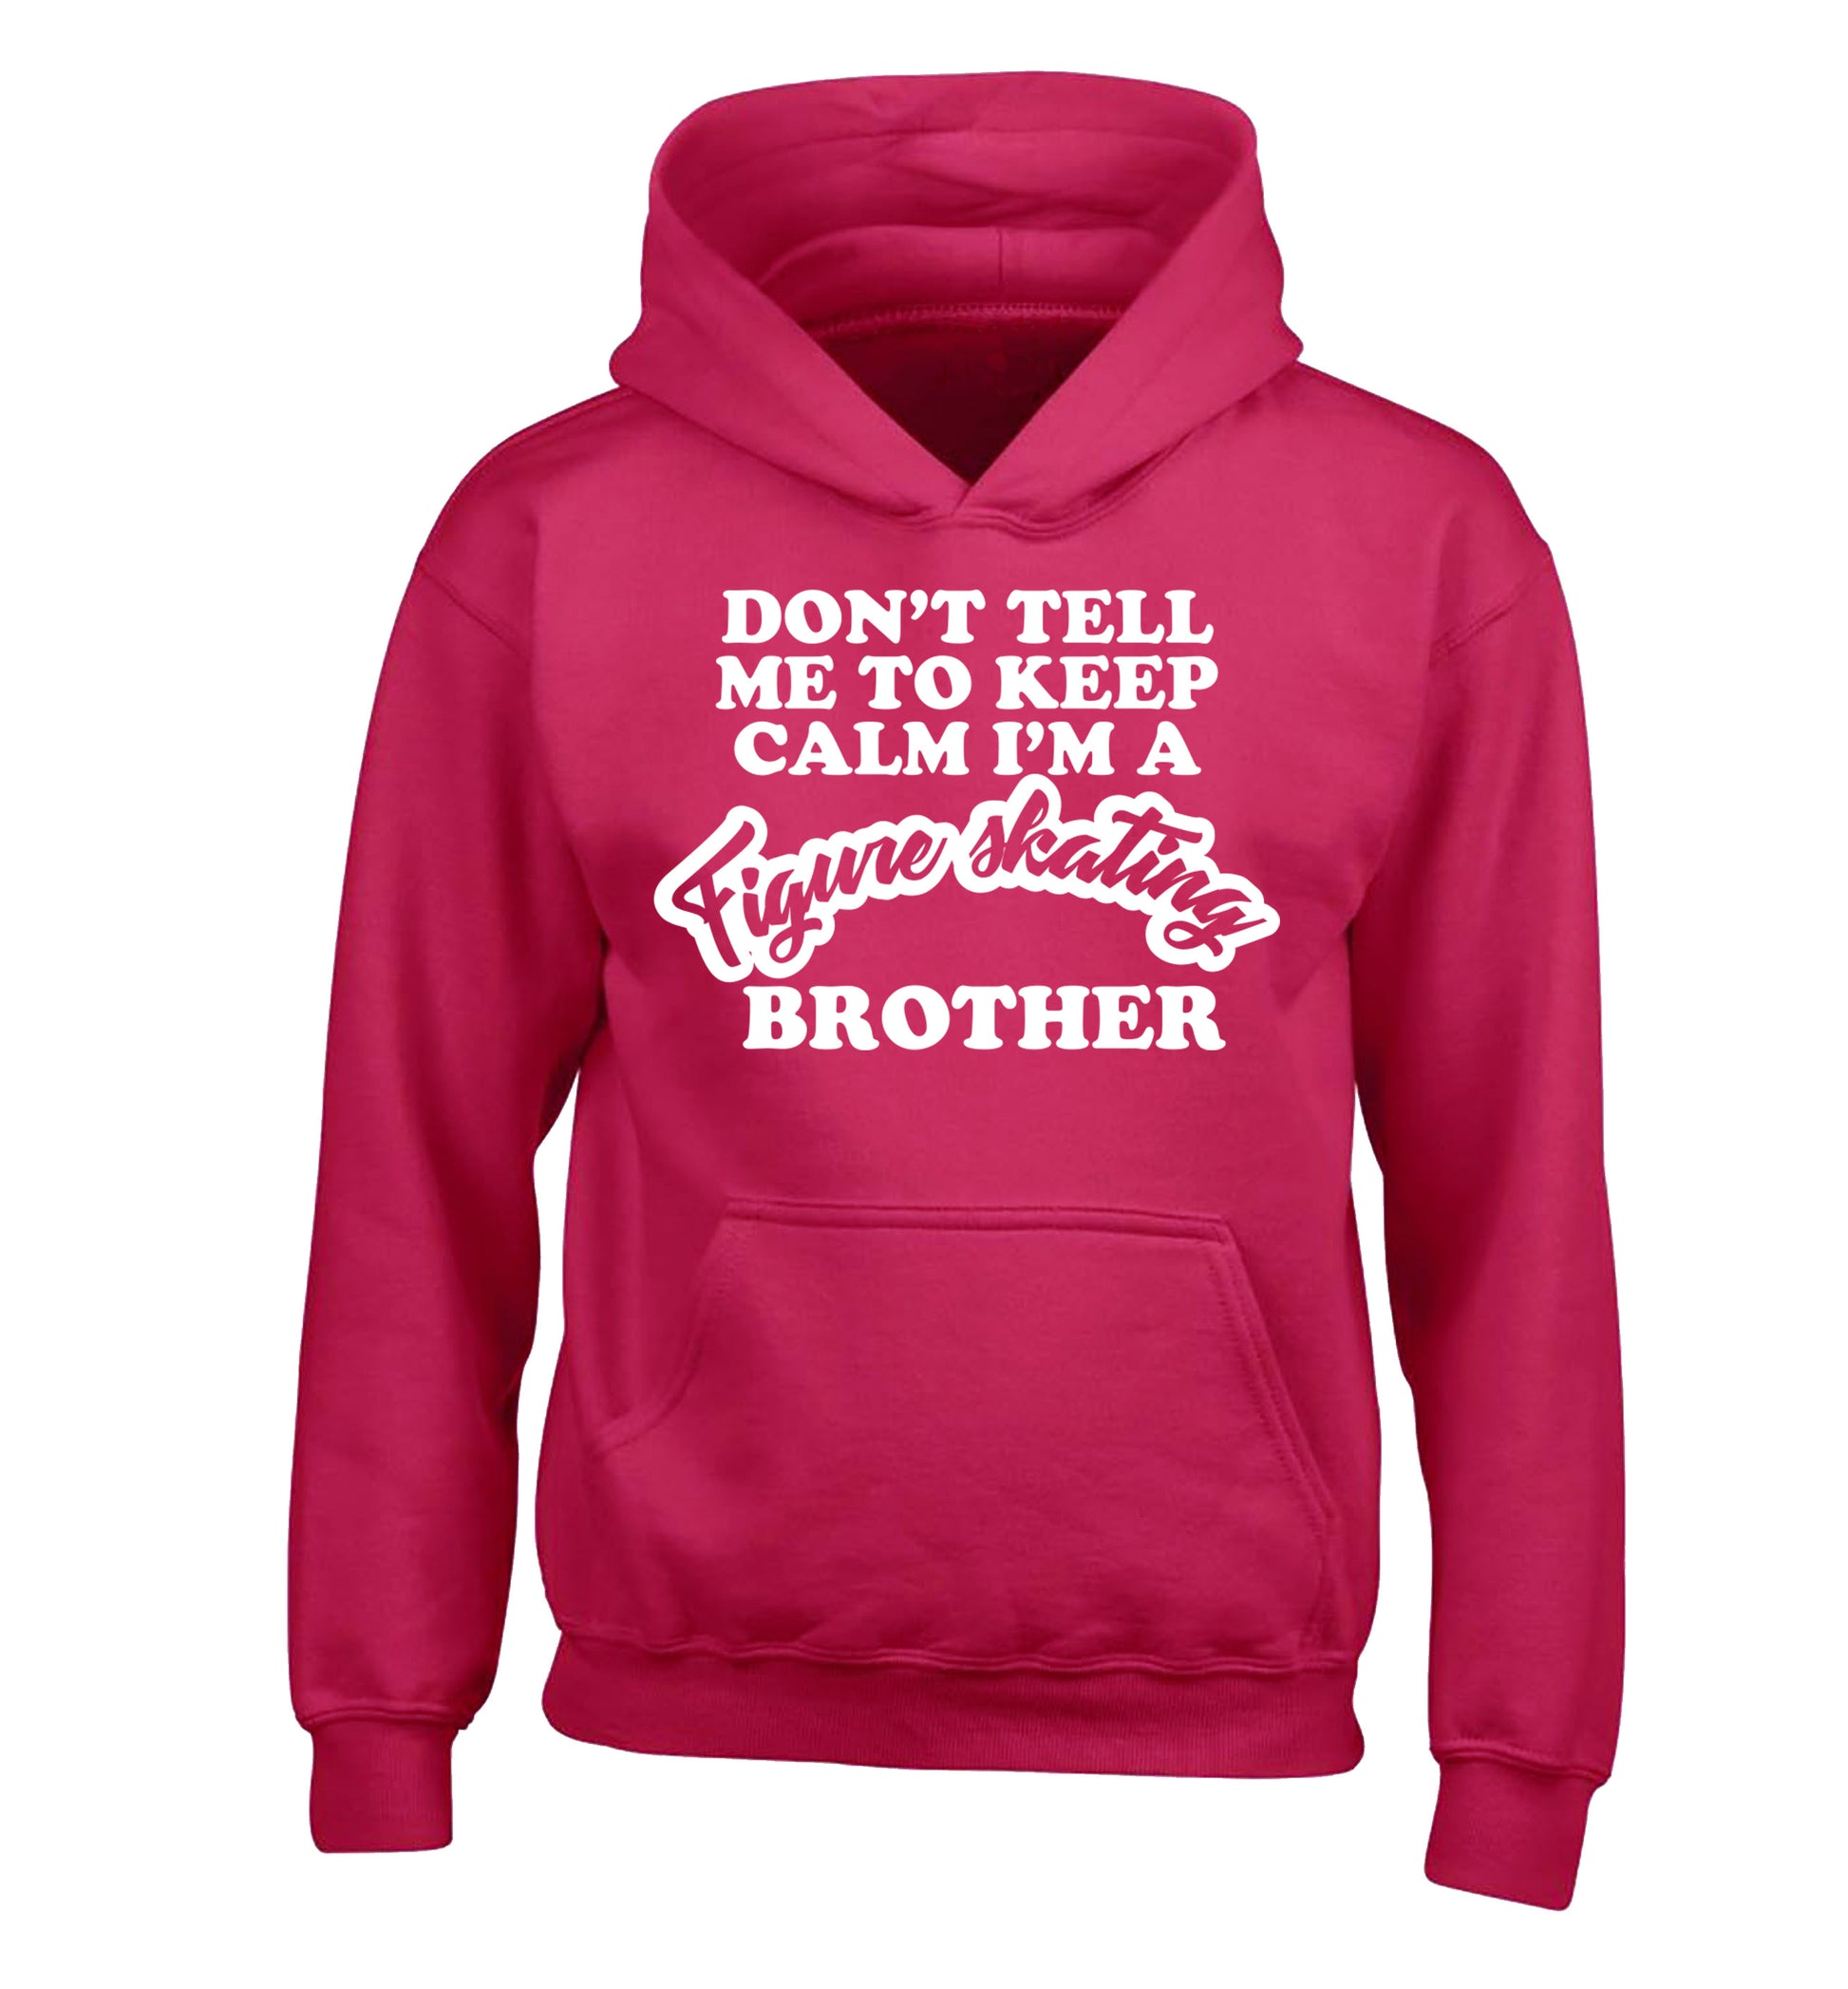 Don't tell me to keep calm I'm a figure skating brother children's pink hoodie 12-14 Years